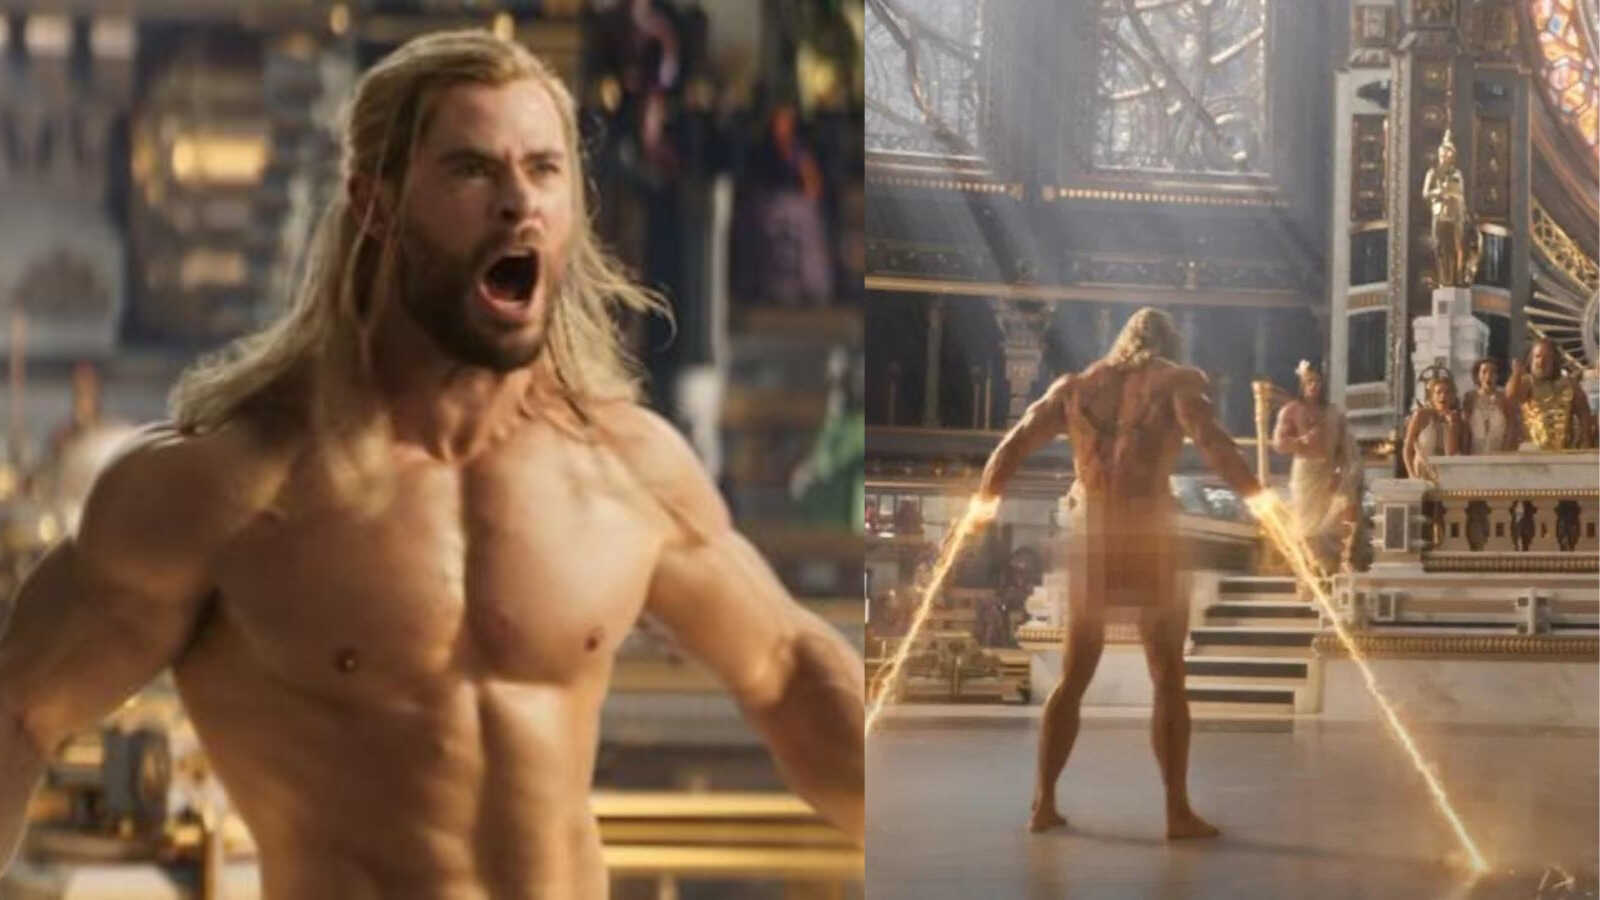 Thor 4 becomes first MCU film to receive a PG-13 rating for partial nudity